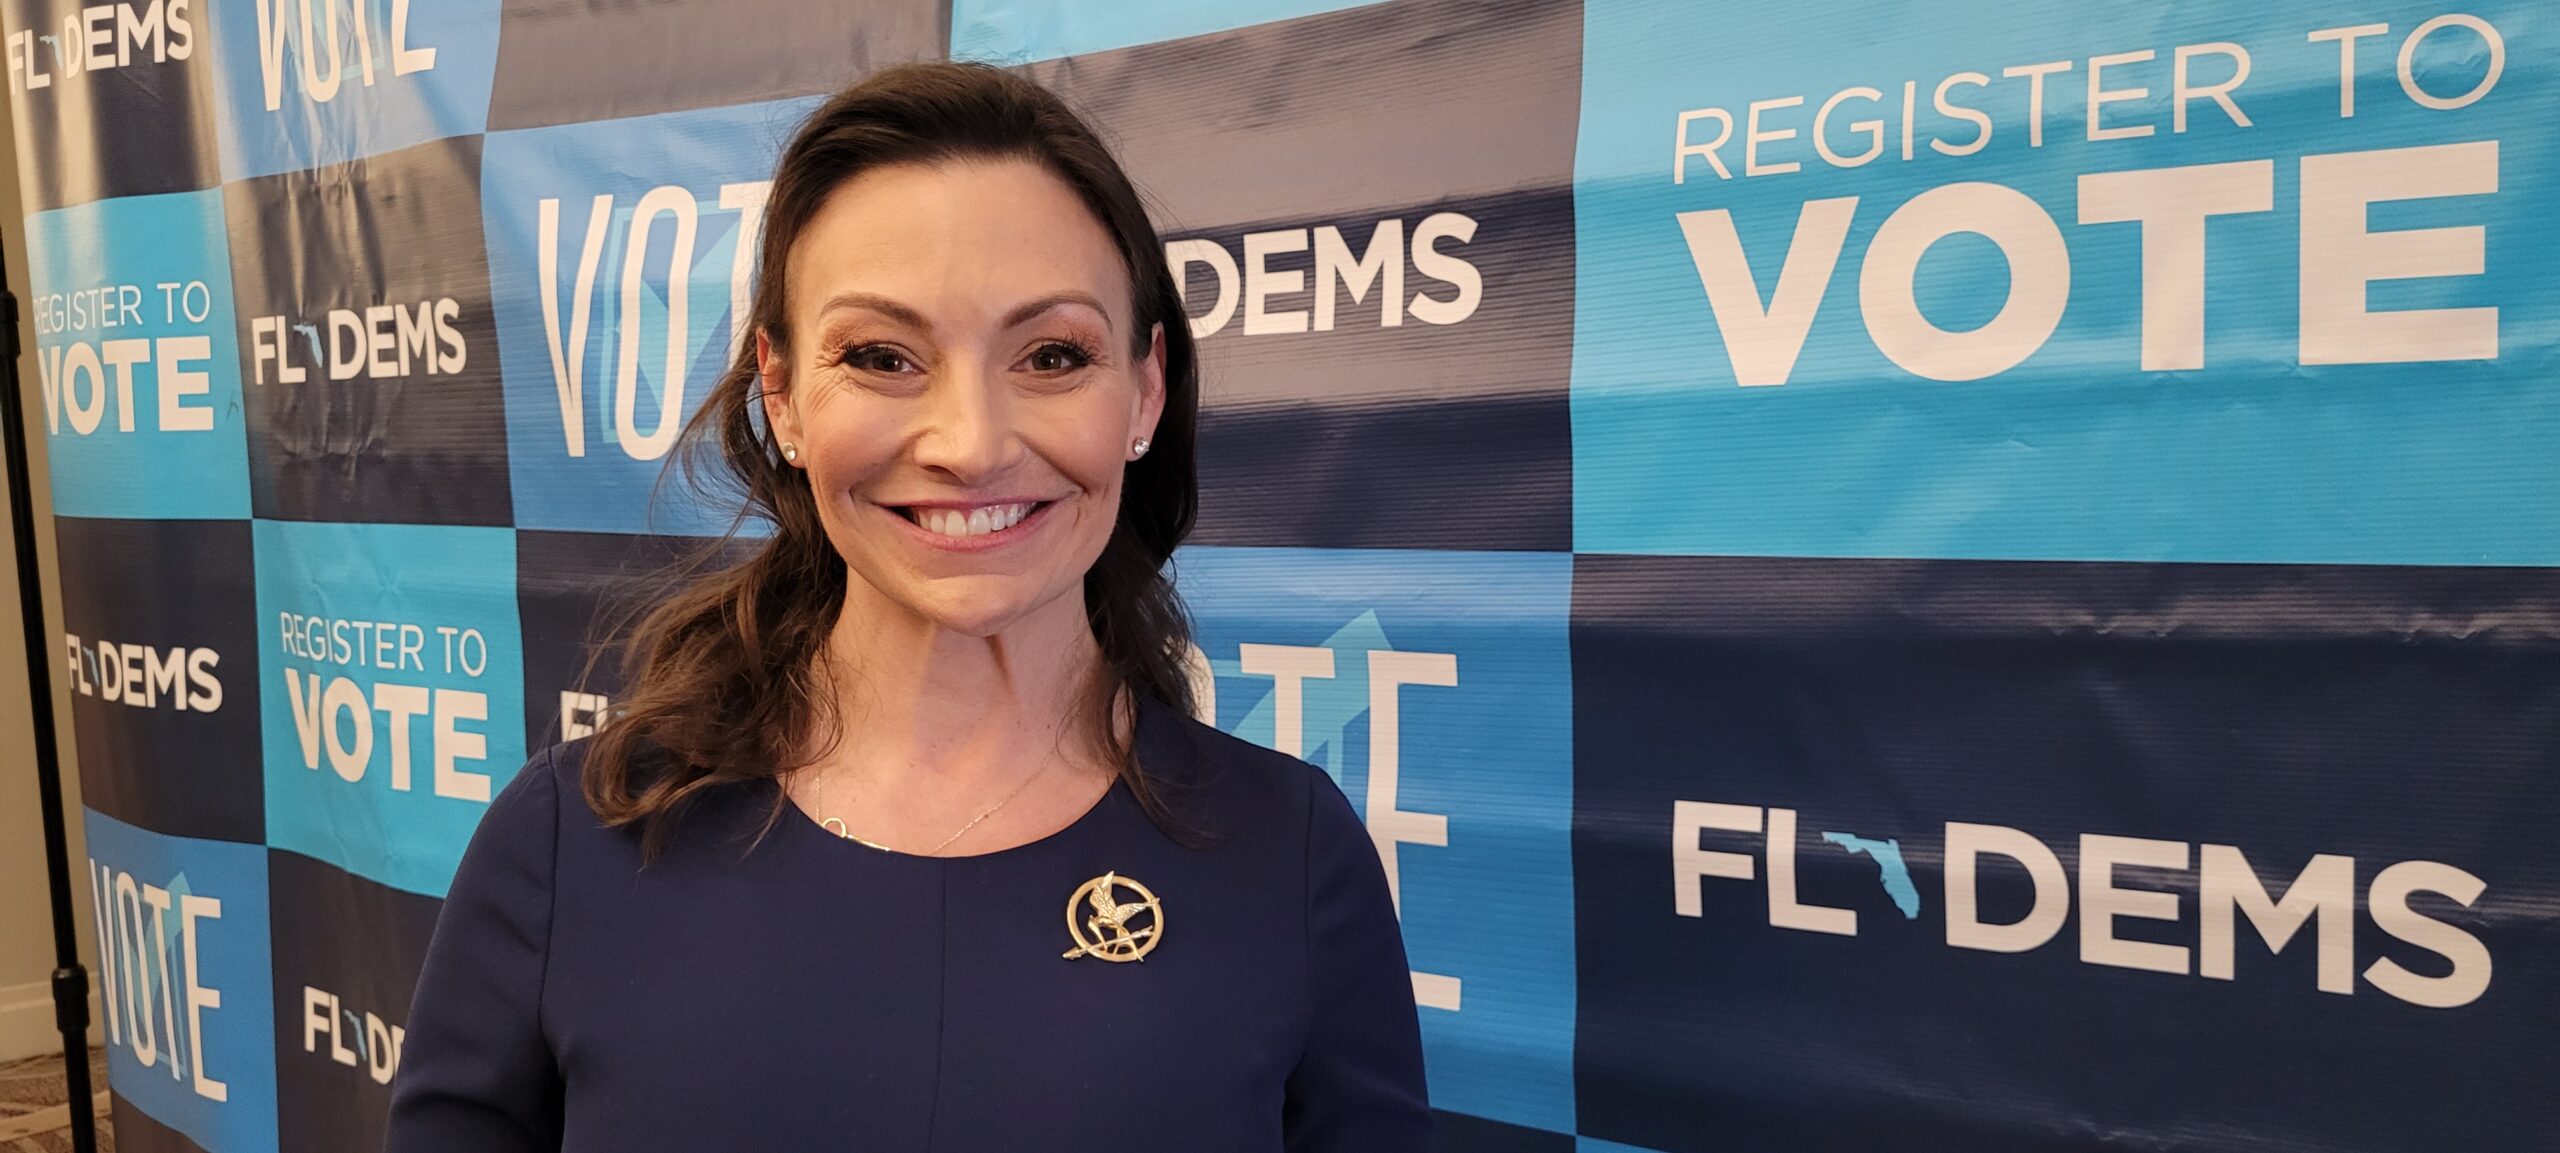 Nikki Fried to rally Jacksonville Democrats to vote early